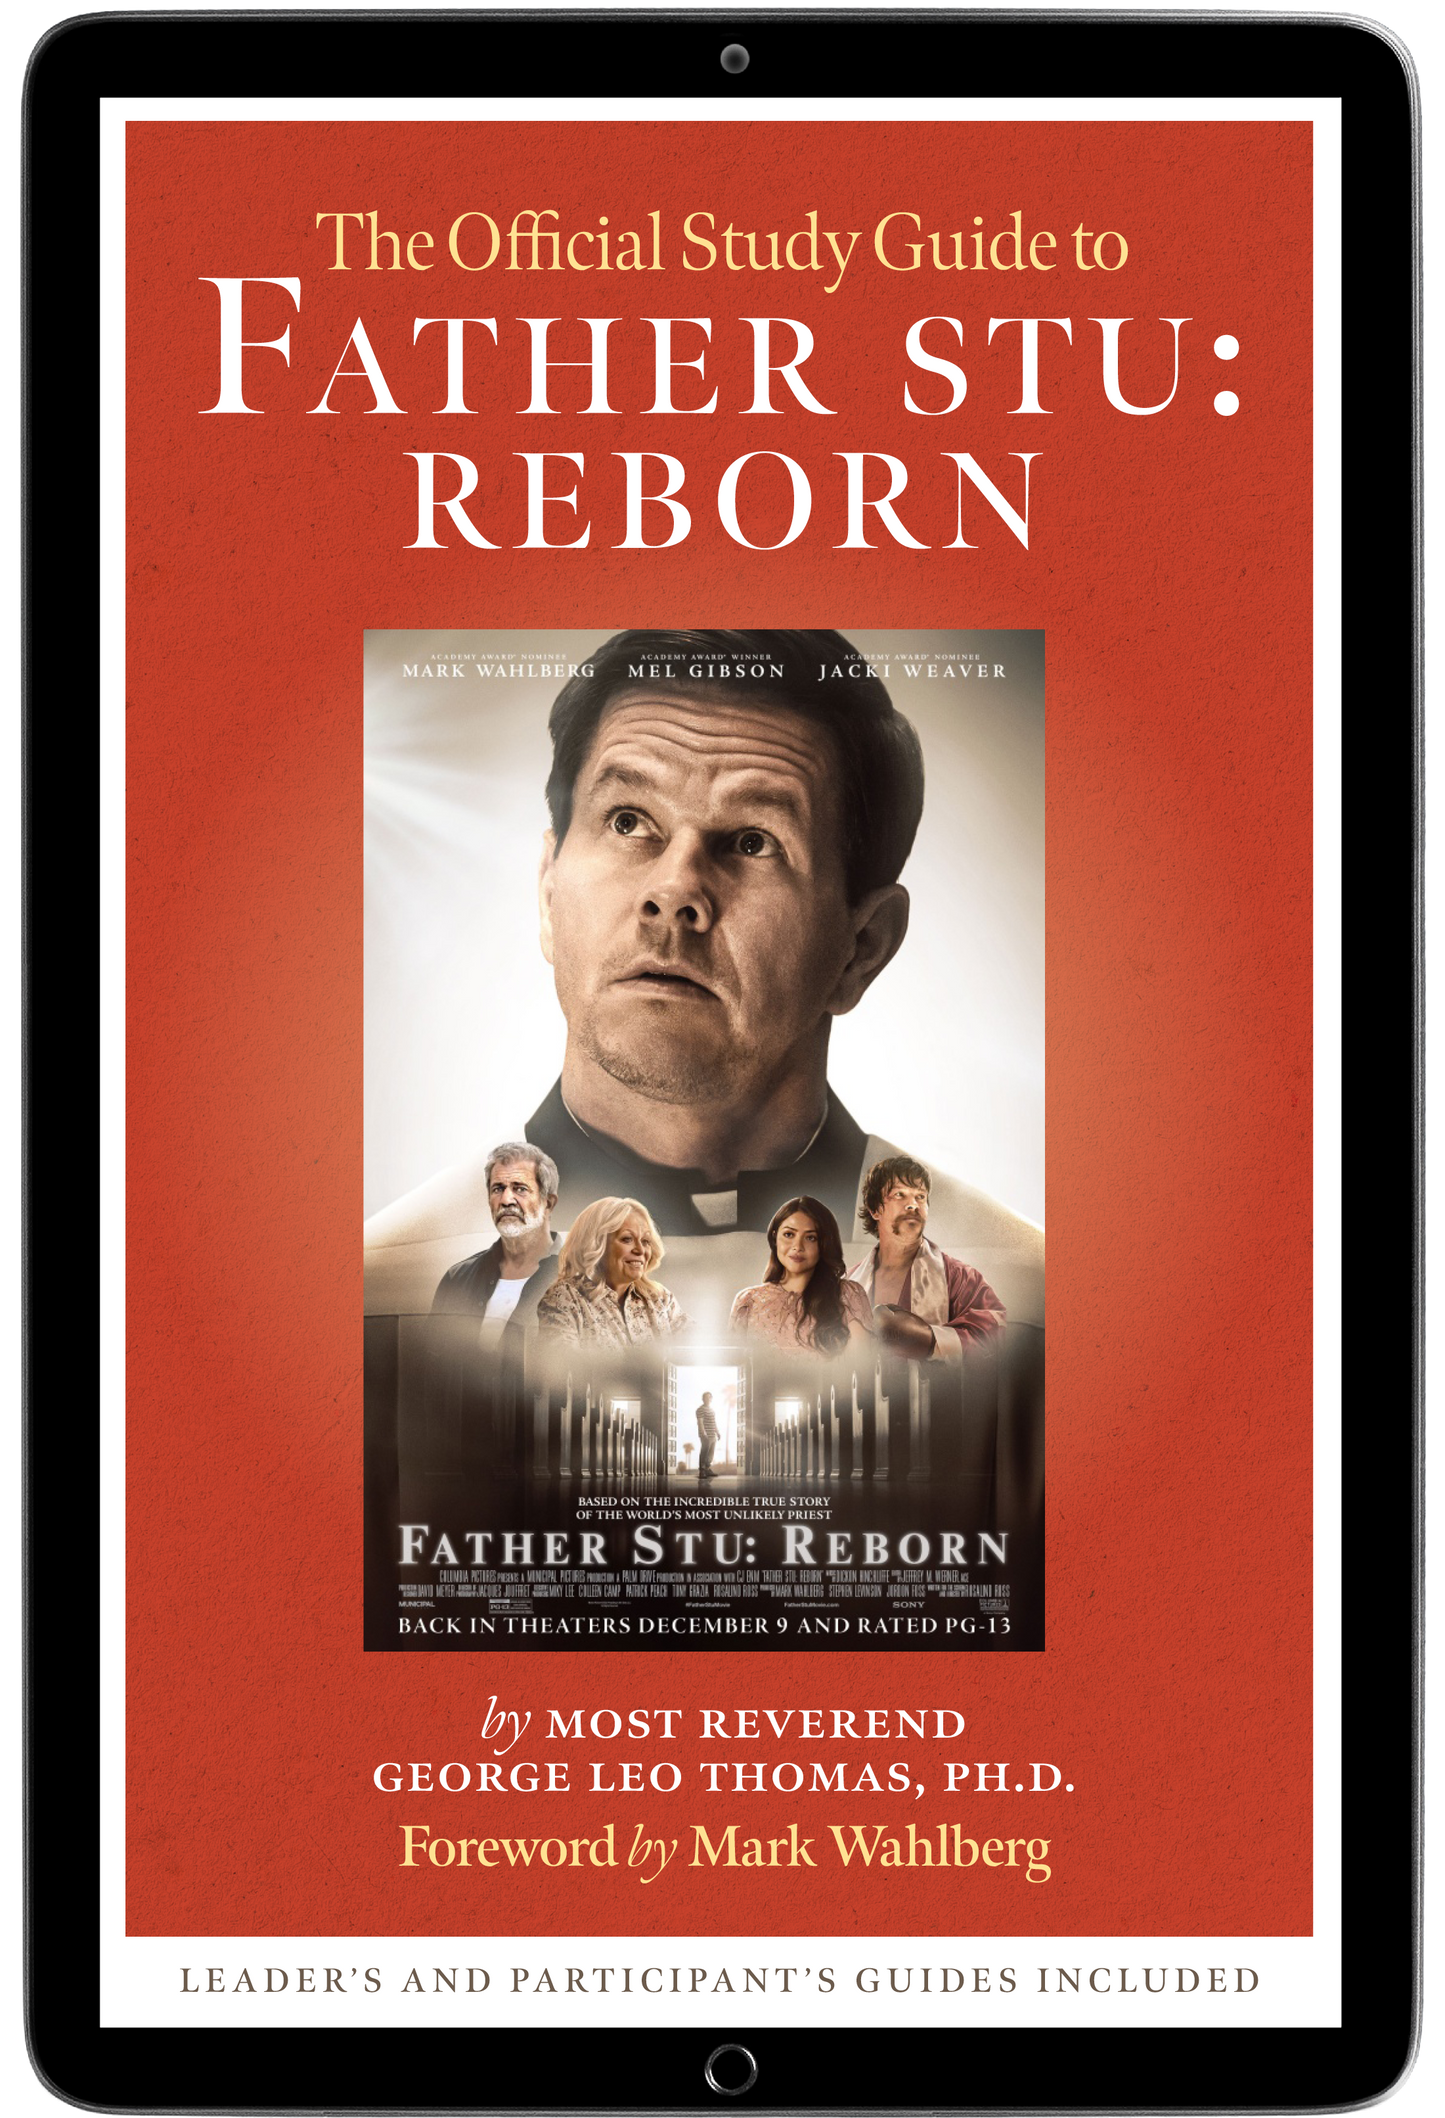 The Official Study Guide to Father Stu: Reborn